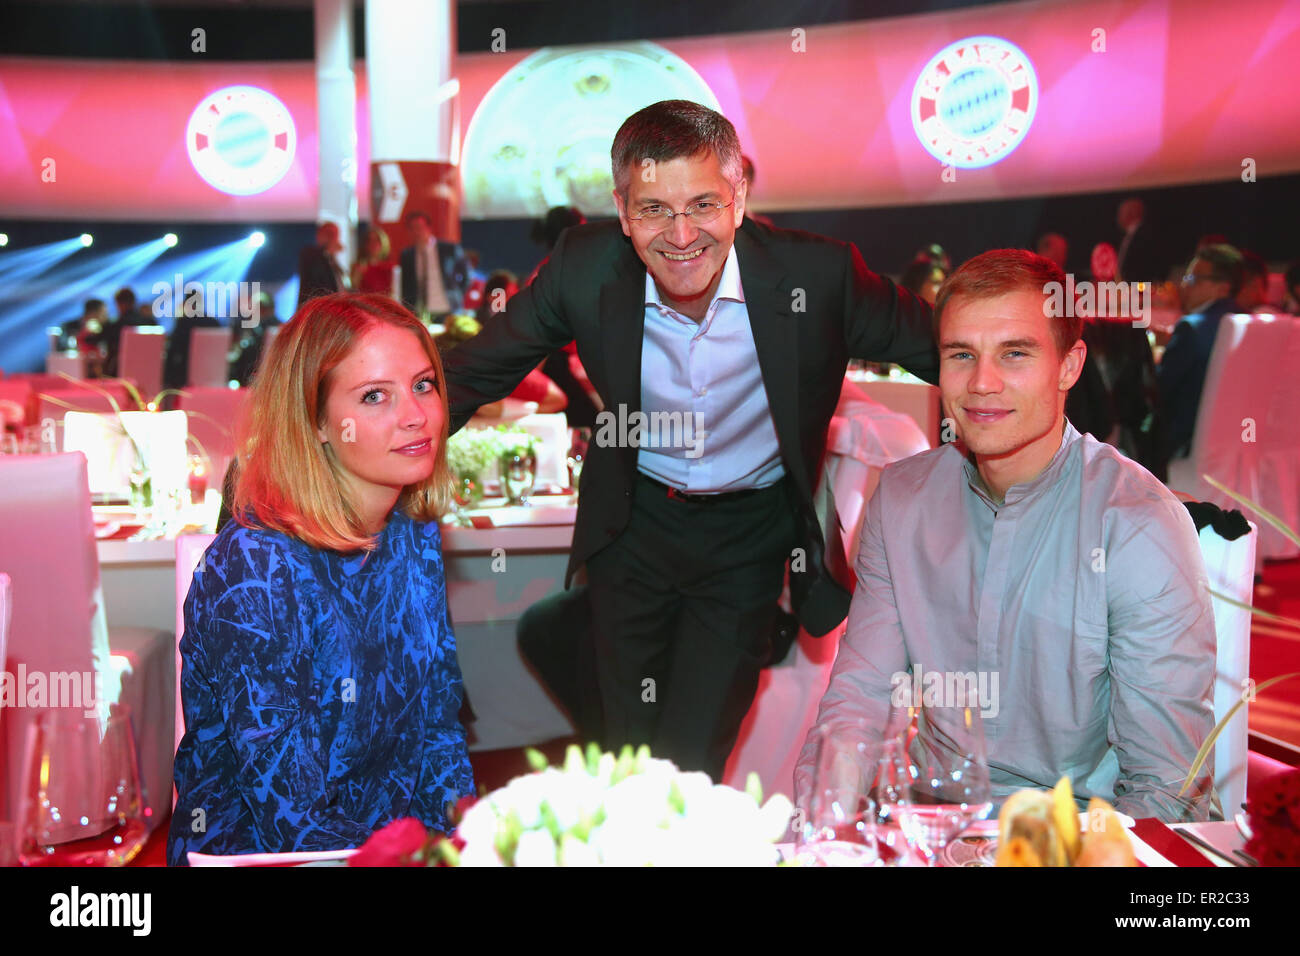 Munich, Germany. 23rd May, 2015.   Herbert Hainer, CEO of adidas group talks to Holger Badstuber during the FC Bayern Muenchen Bundesliga Champions Dinner at Postpalast on May 23, 2015 in Munich, Germany. Credit:  kolvenbach/Alamy Live News Stock Photo